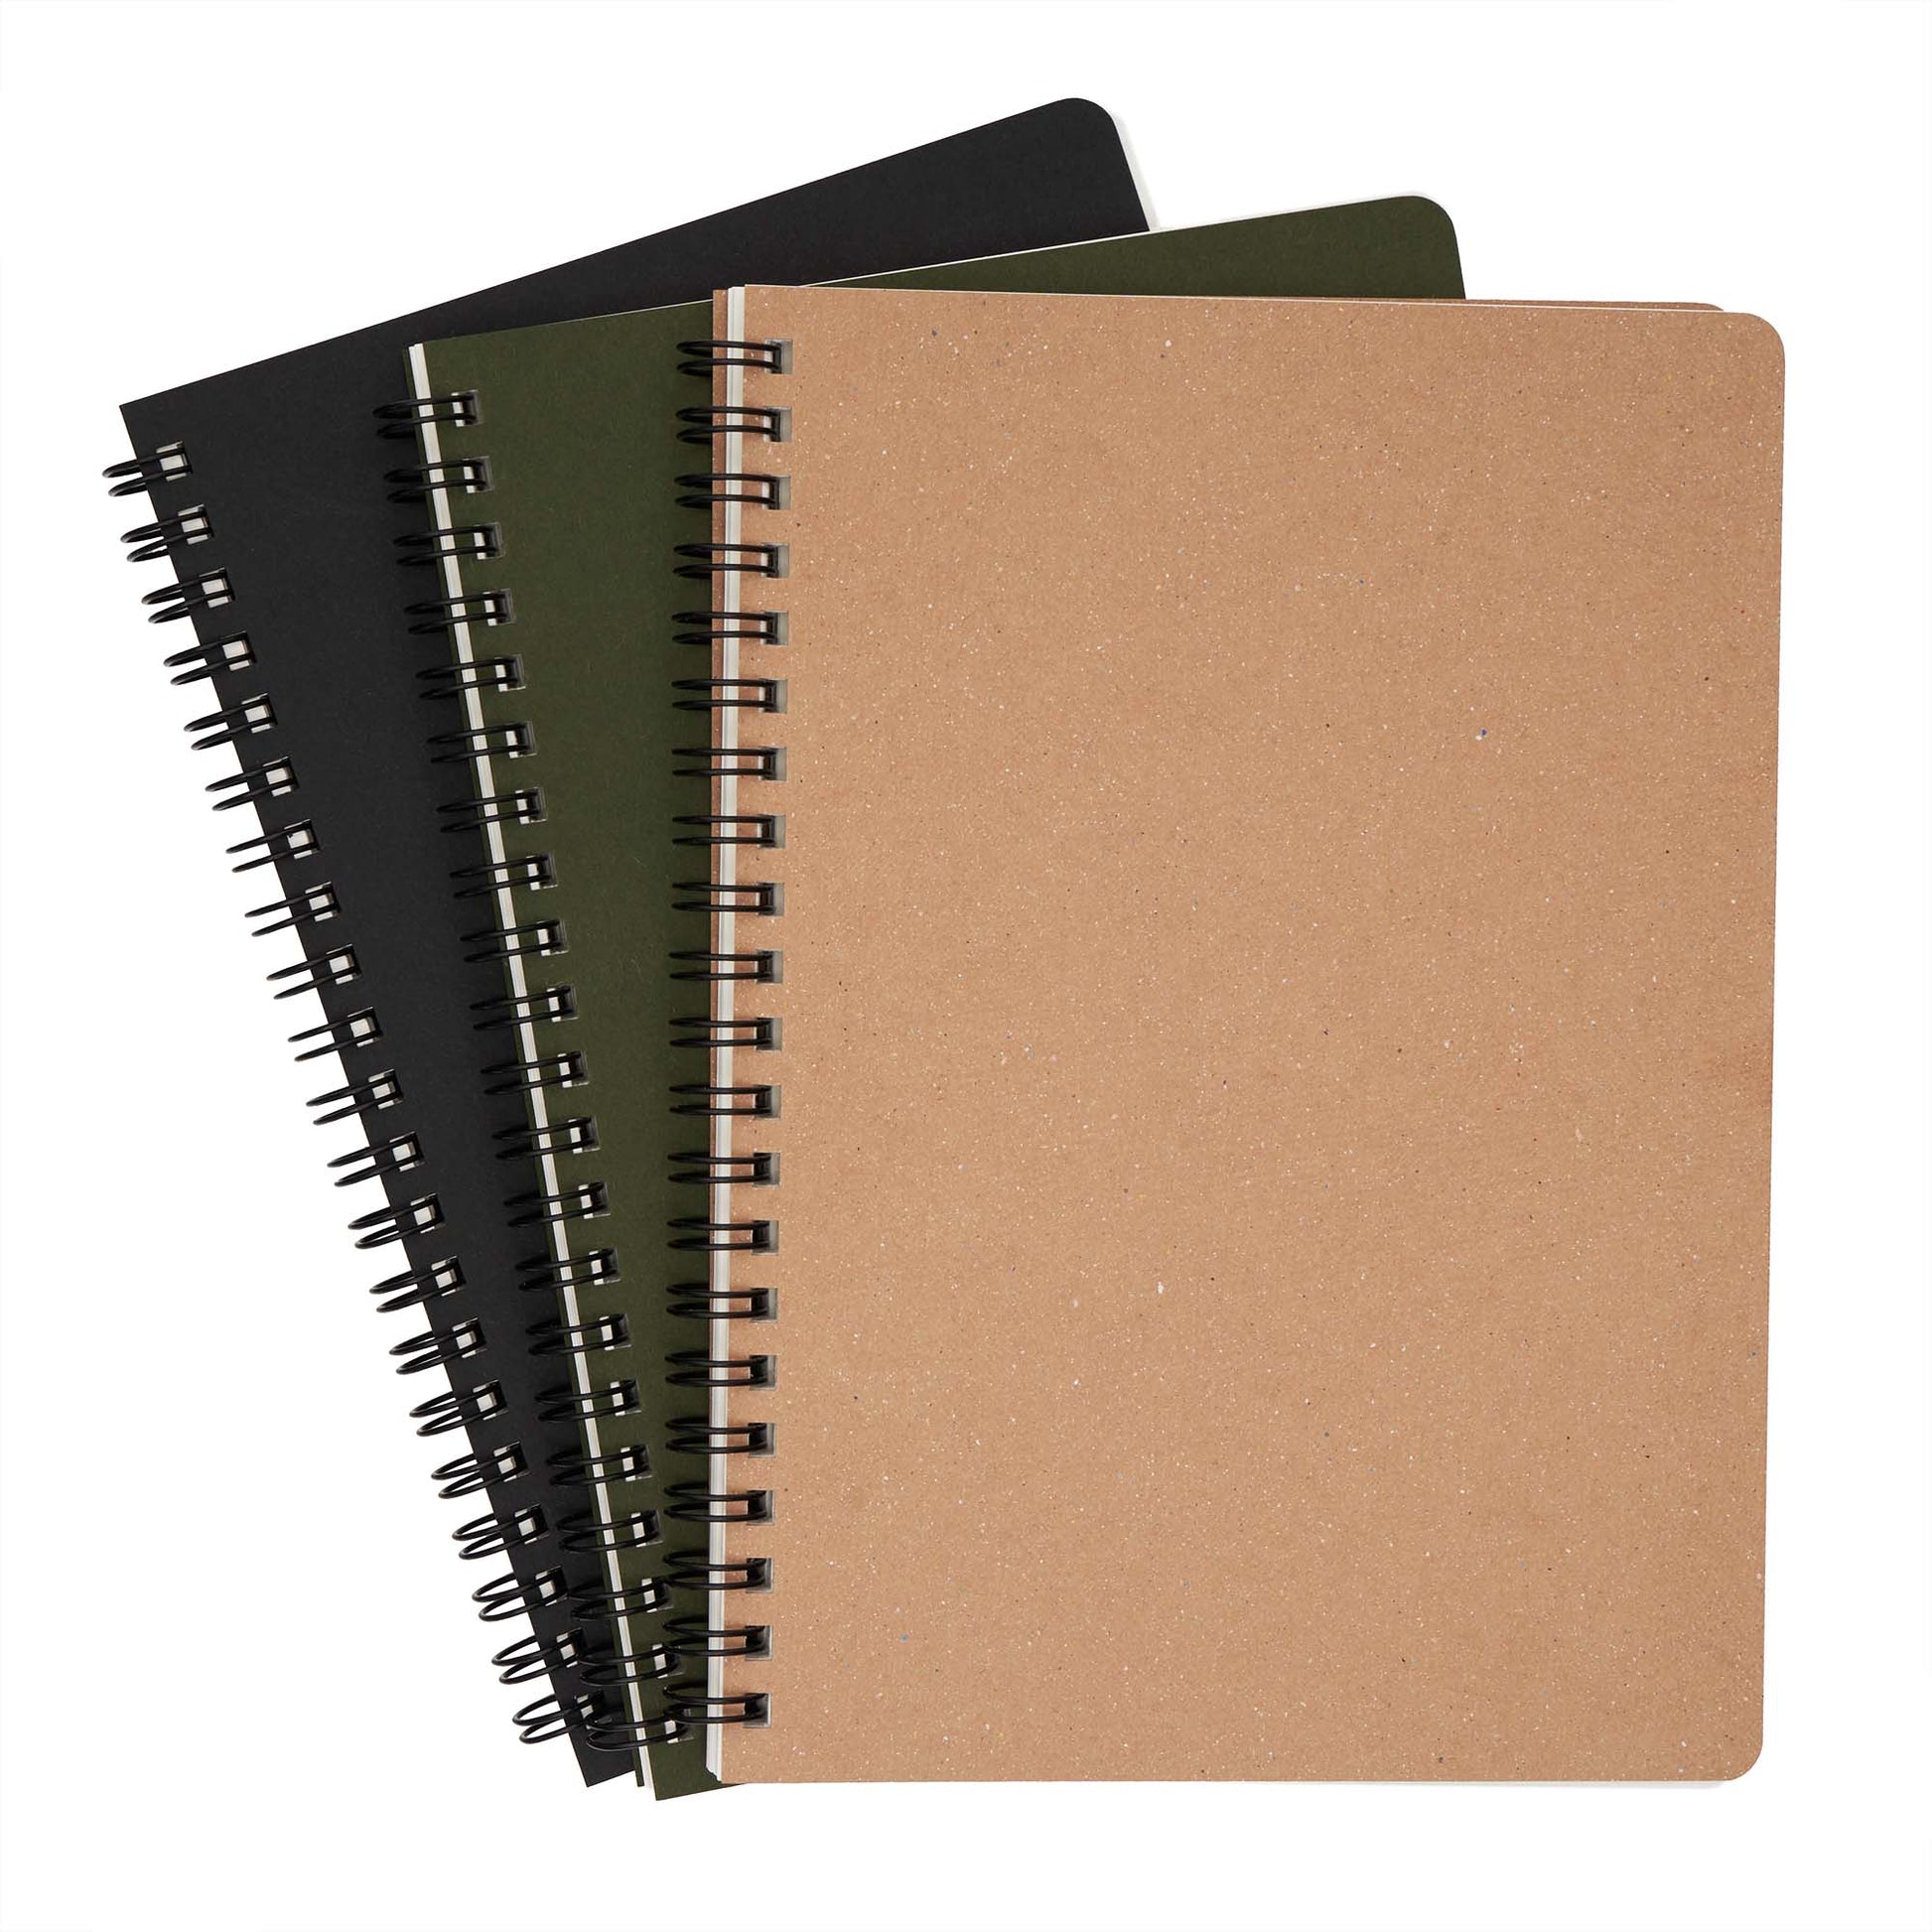 The Paper Mind Cosmo Air Light Twin Ring Notebooks Spiral Fountain Pen Friendly Notebooks